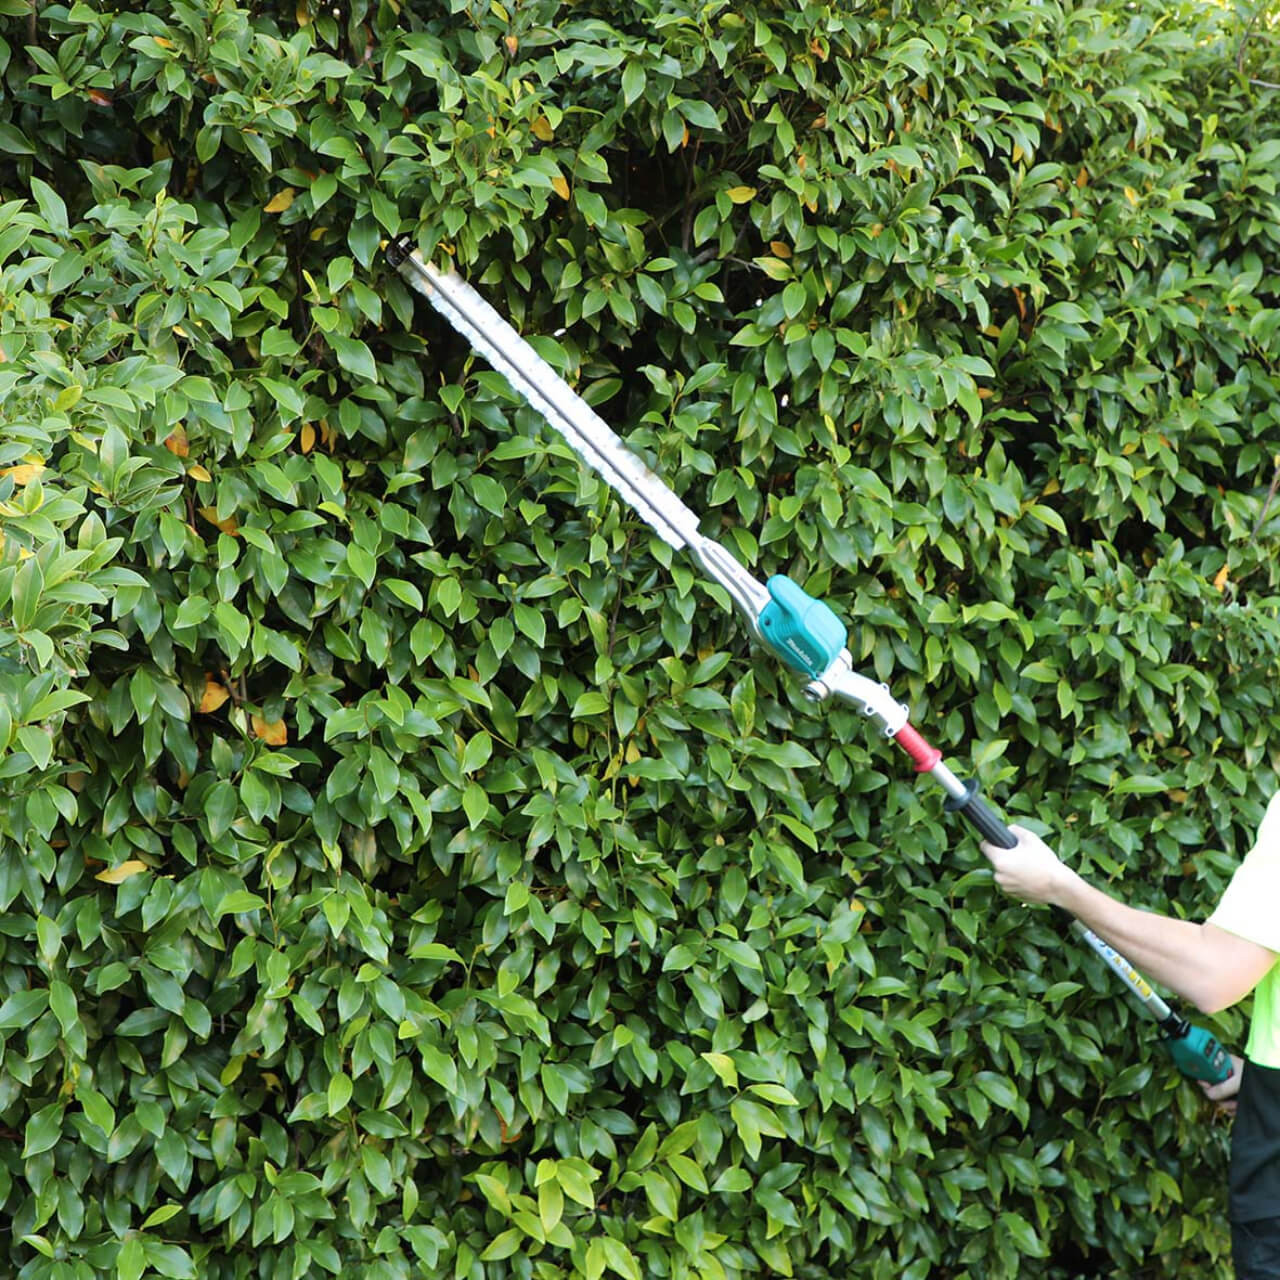 Makita 18V BRUSHLESS 500mm Pole Hedge Trimmer - Tool Only